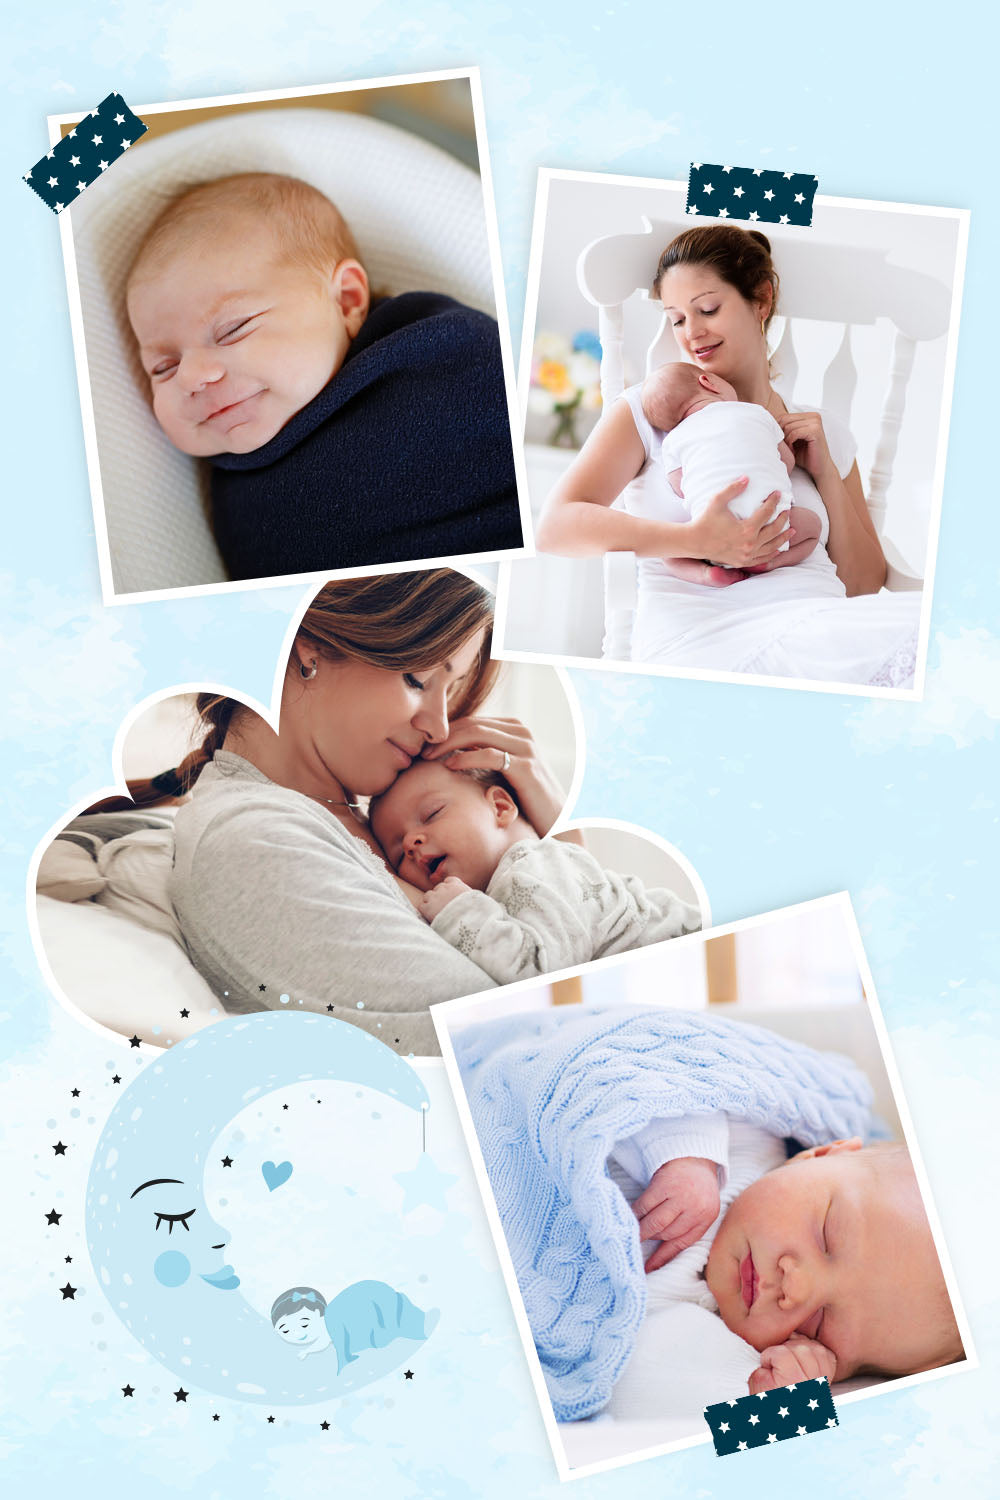 Various photo album styled images showing mothers and babies snuggling together